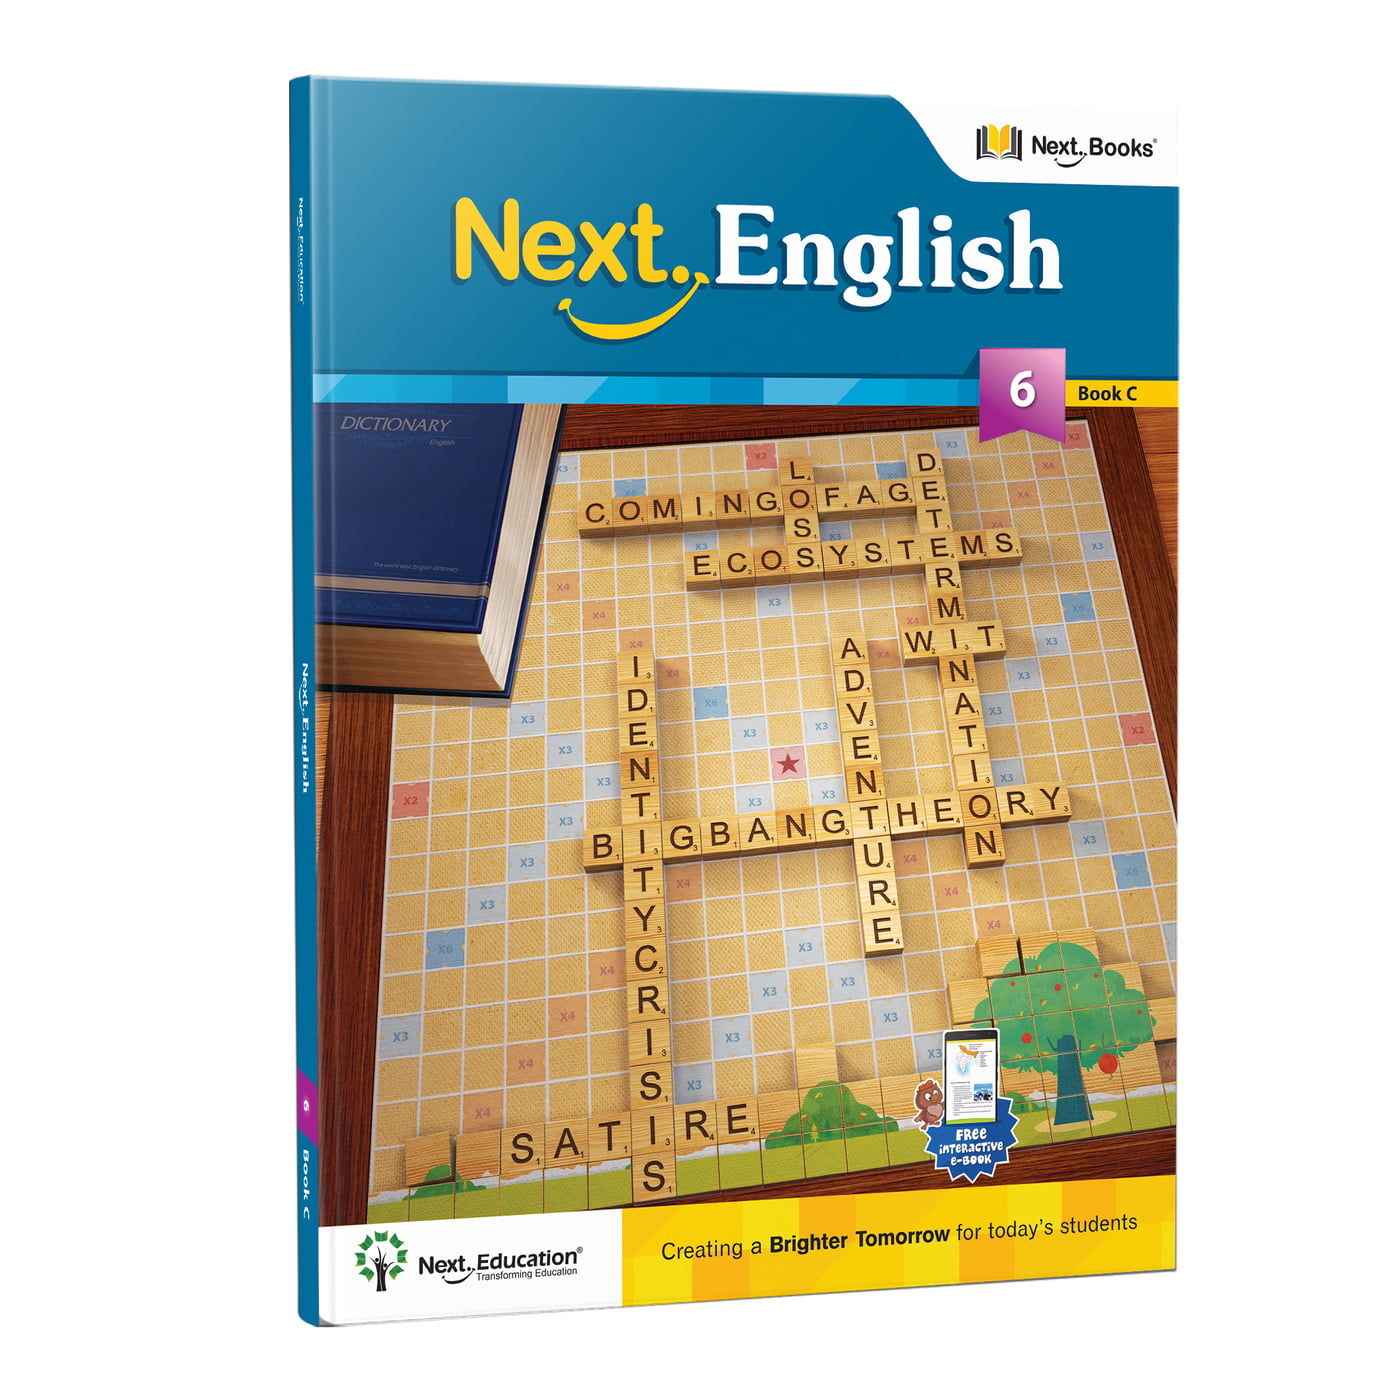 Buy Next English CBSE Work book for 6th class / Level 6 Book C 